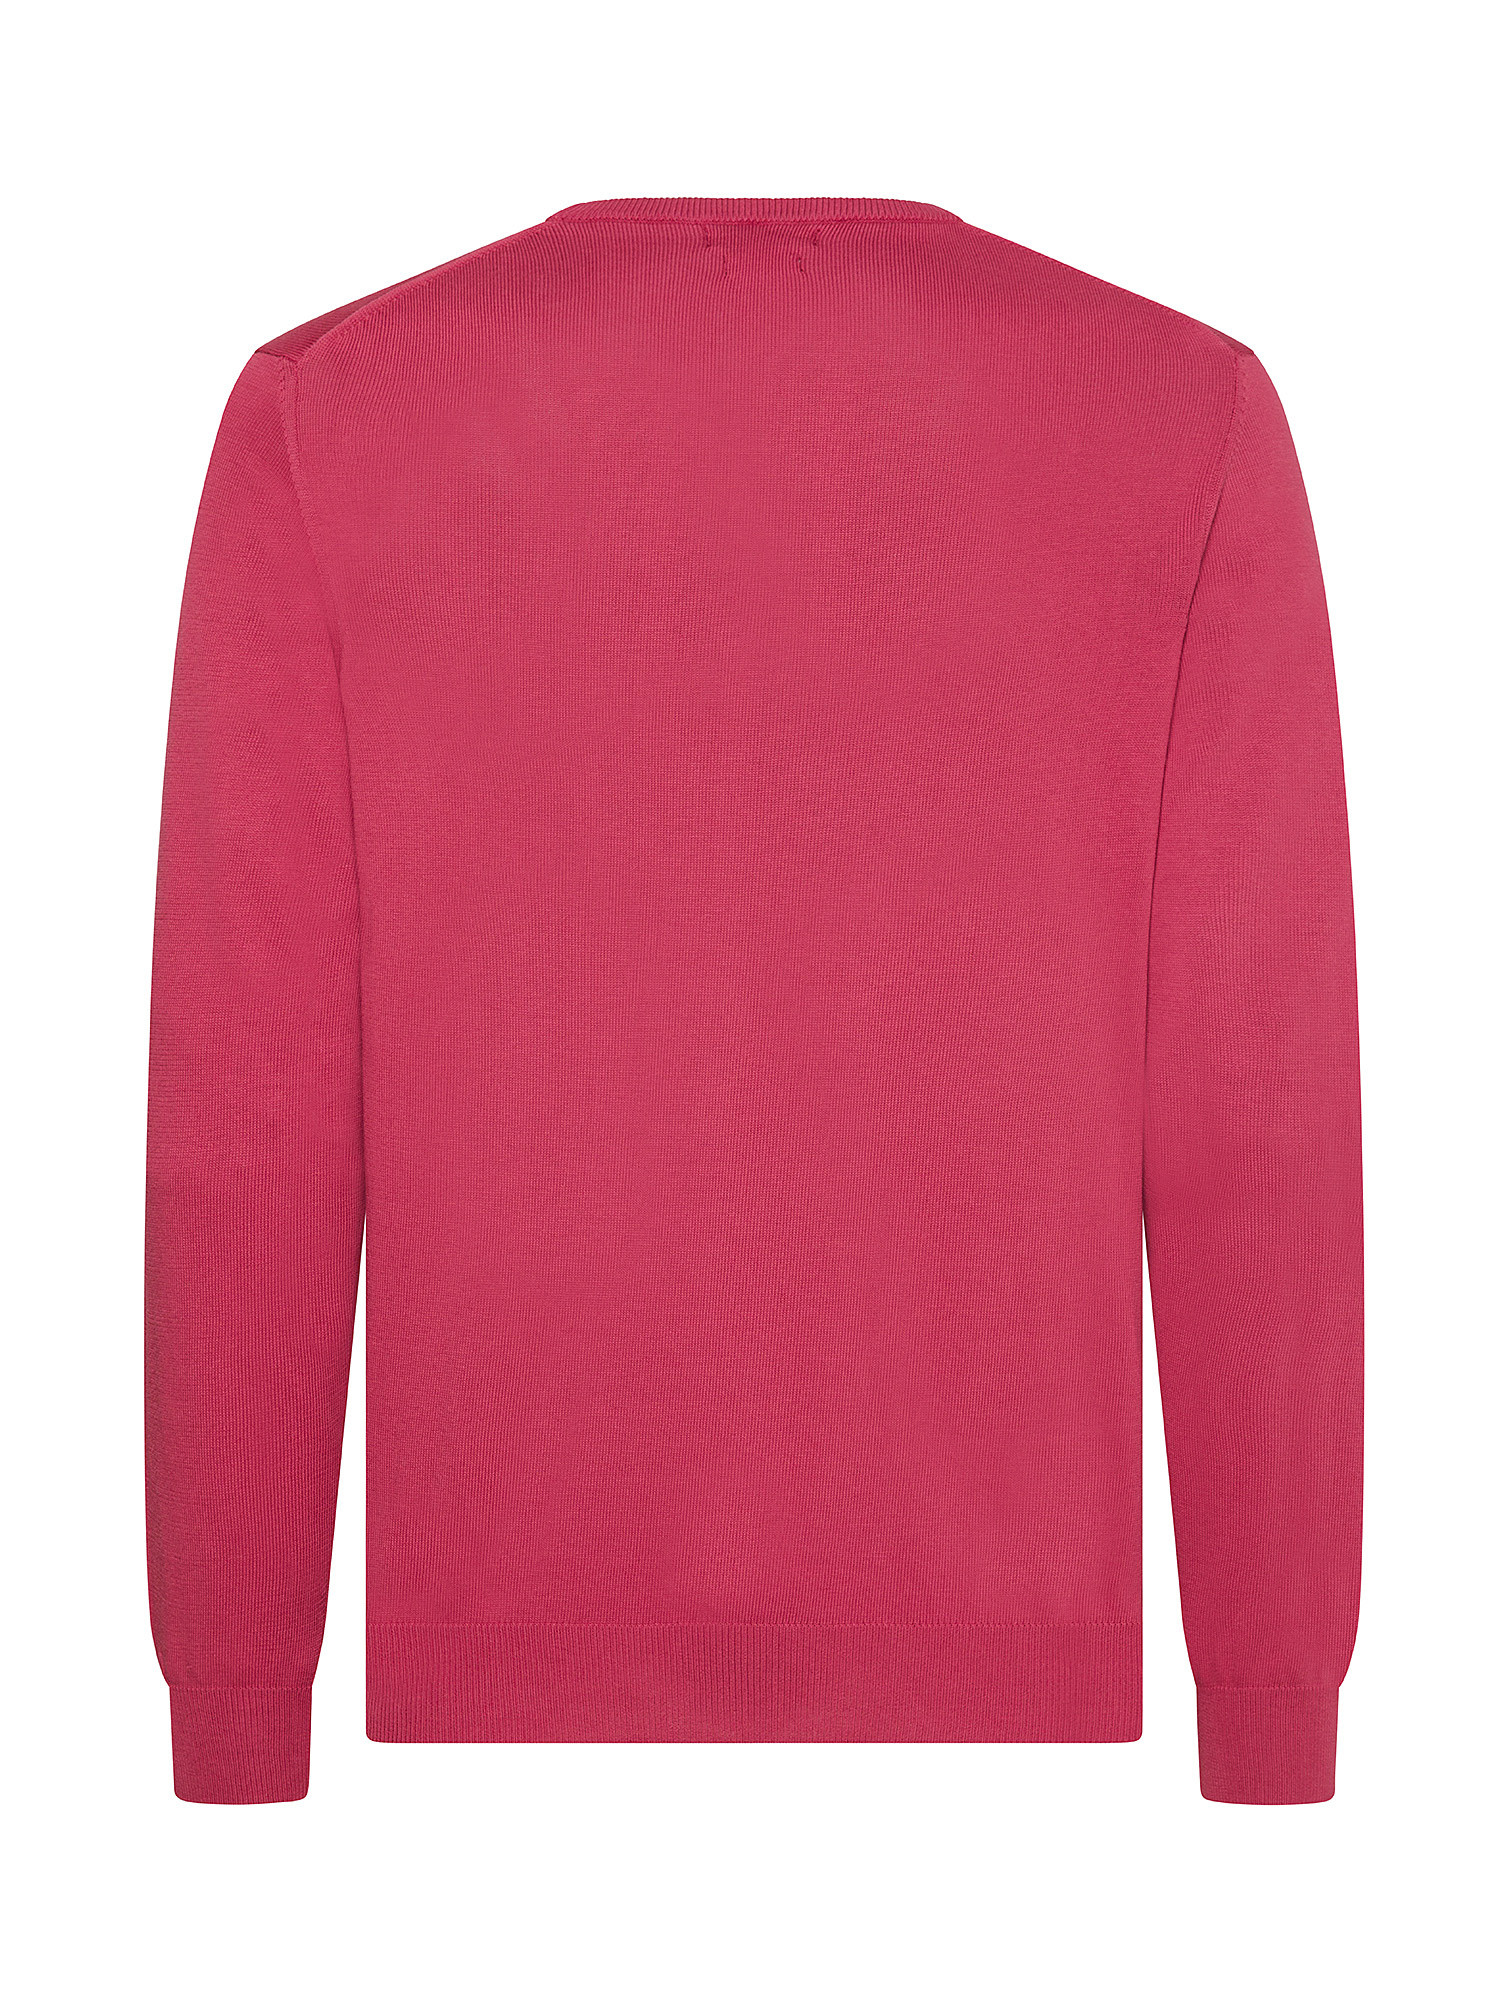 Luca D'Altieri - Crew neck sweater in extrafine pure cotton, Pink Fuchsia, large image number 1